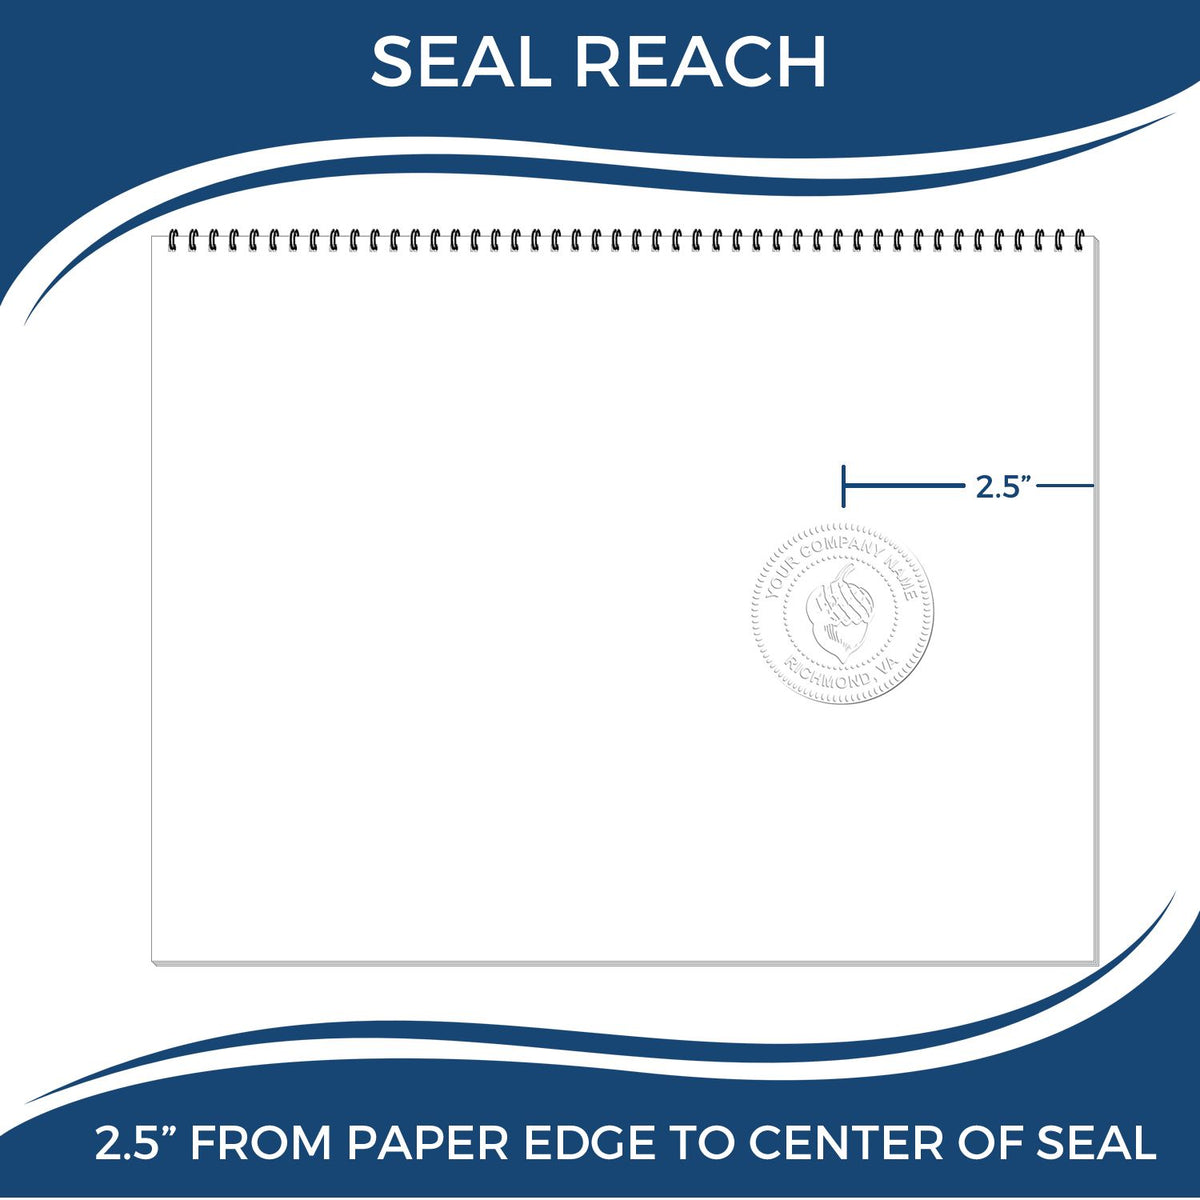 An infographic showing the seal reach which is represented by a ruler and a miniature seal image of the Long Reach Missouri PE Seal